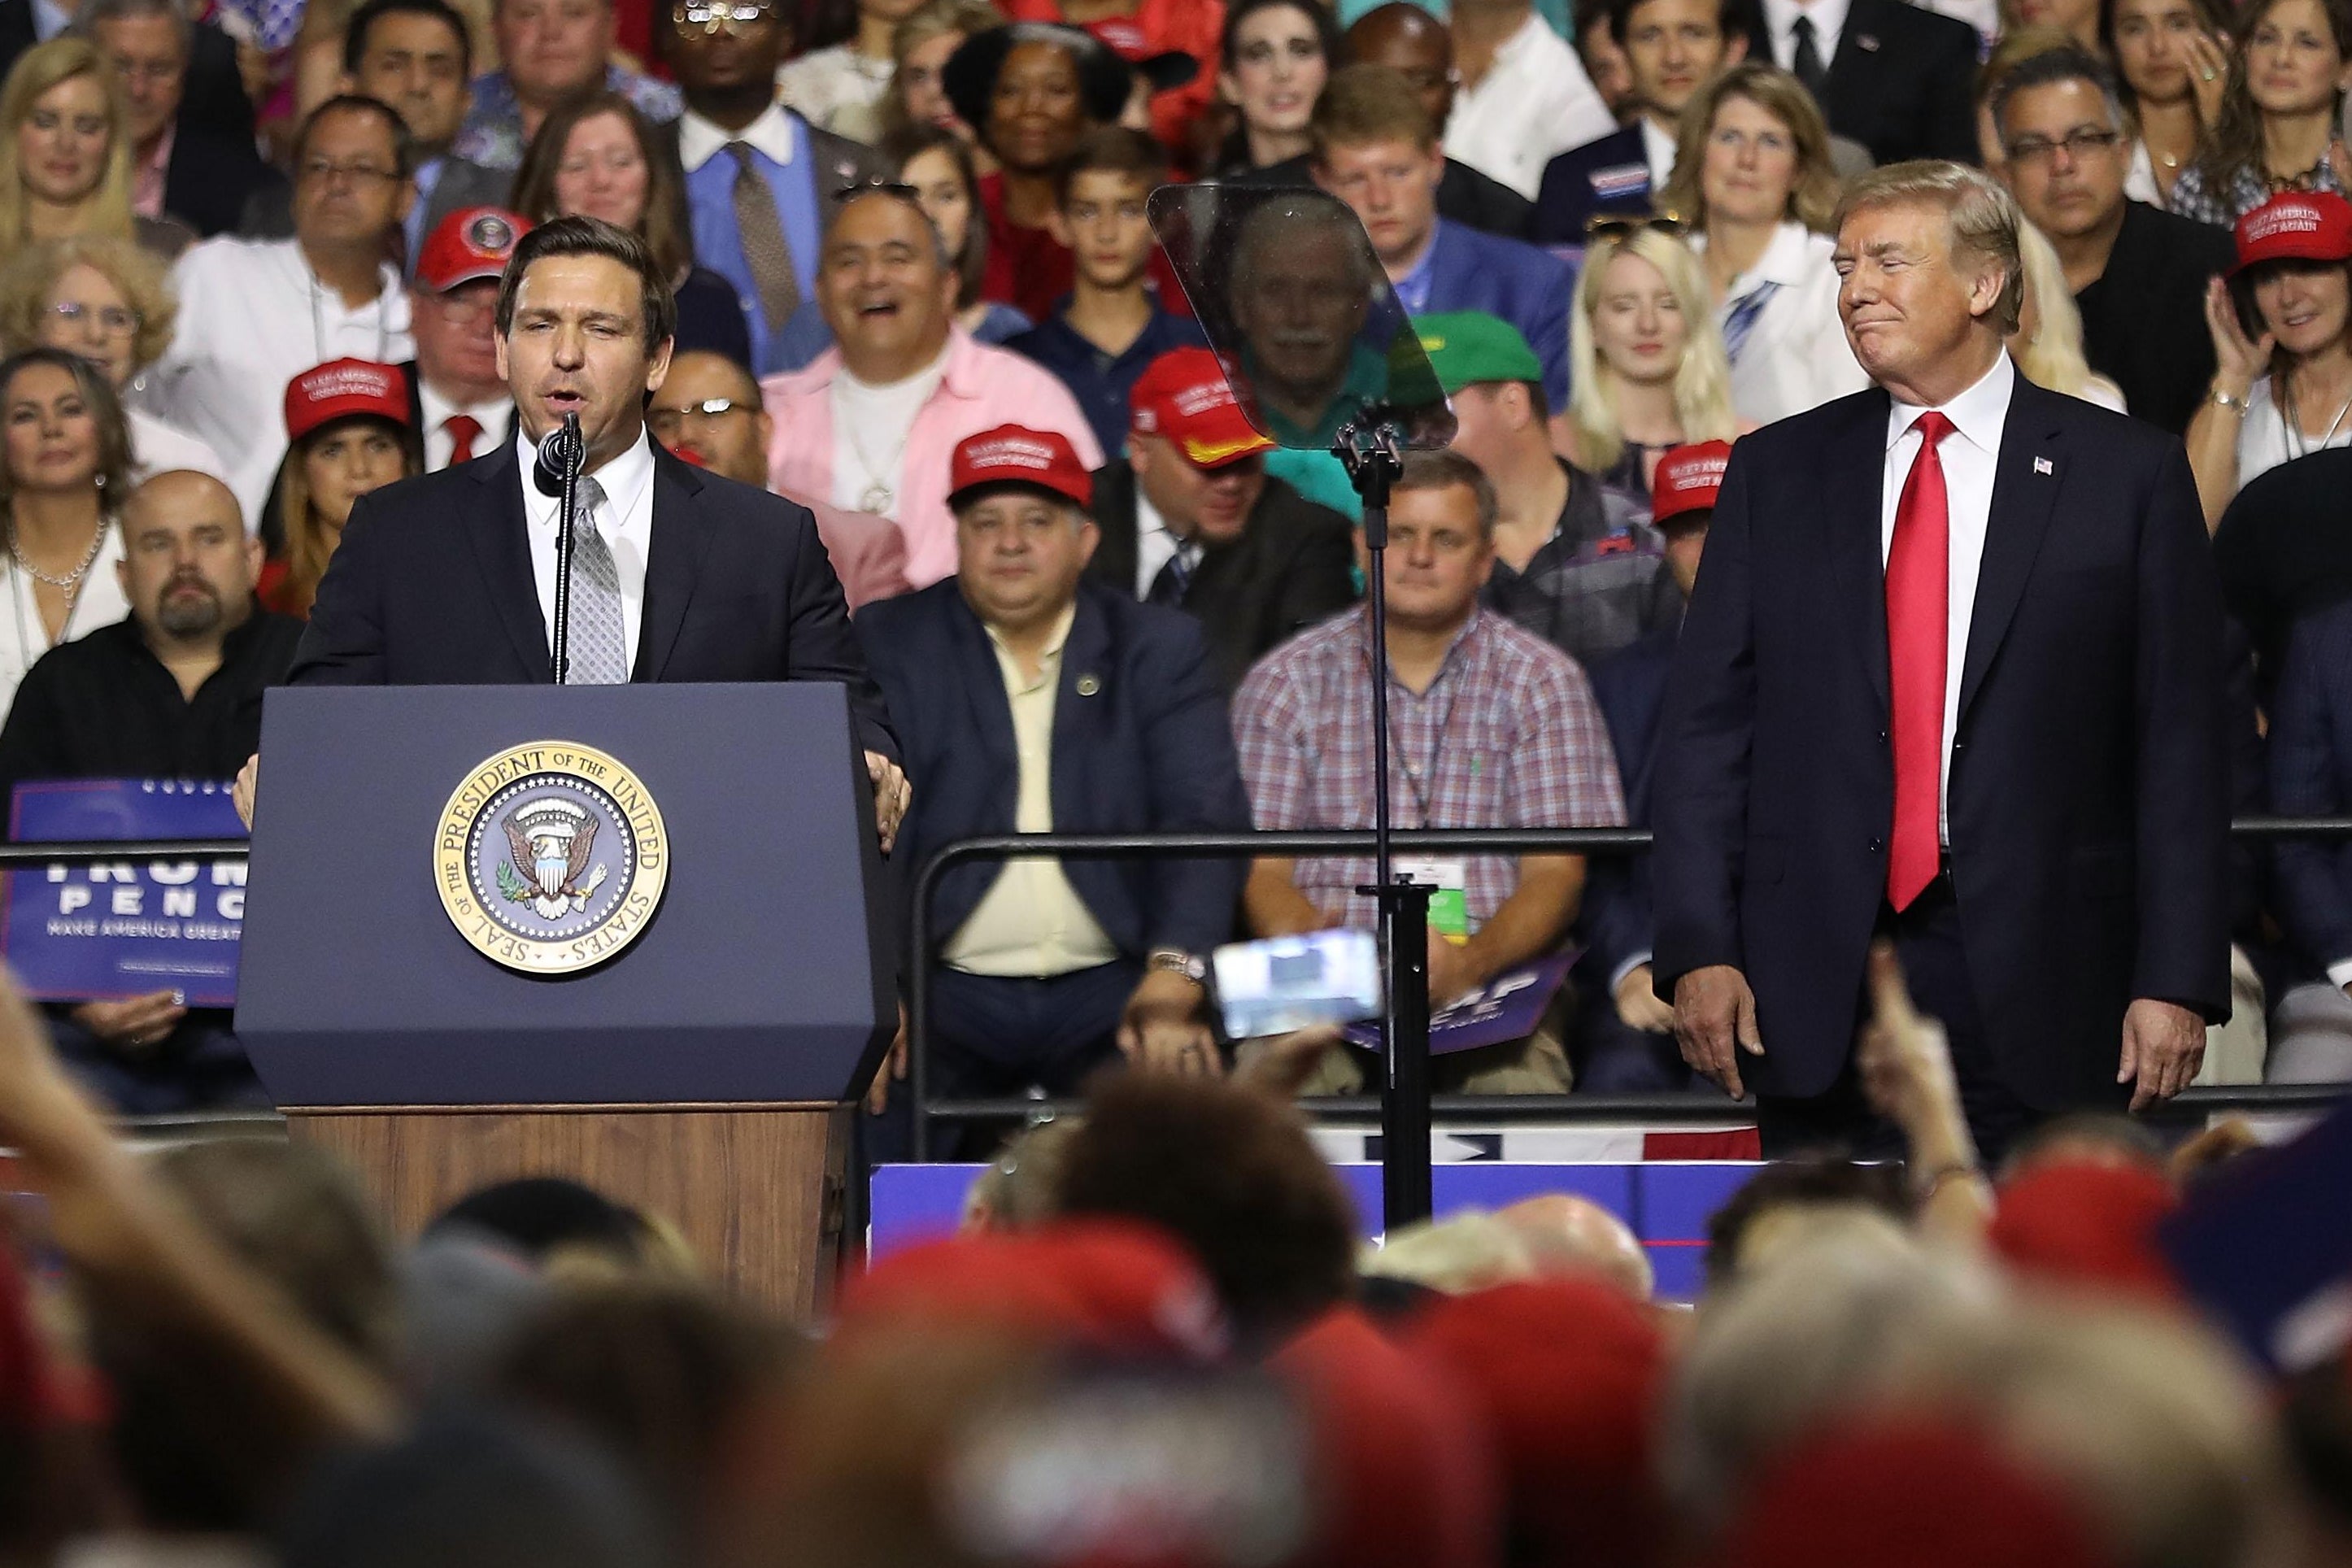 Ron DeSantis speaking at a lectern while Donald Trump watches from the side of the stage